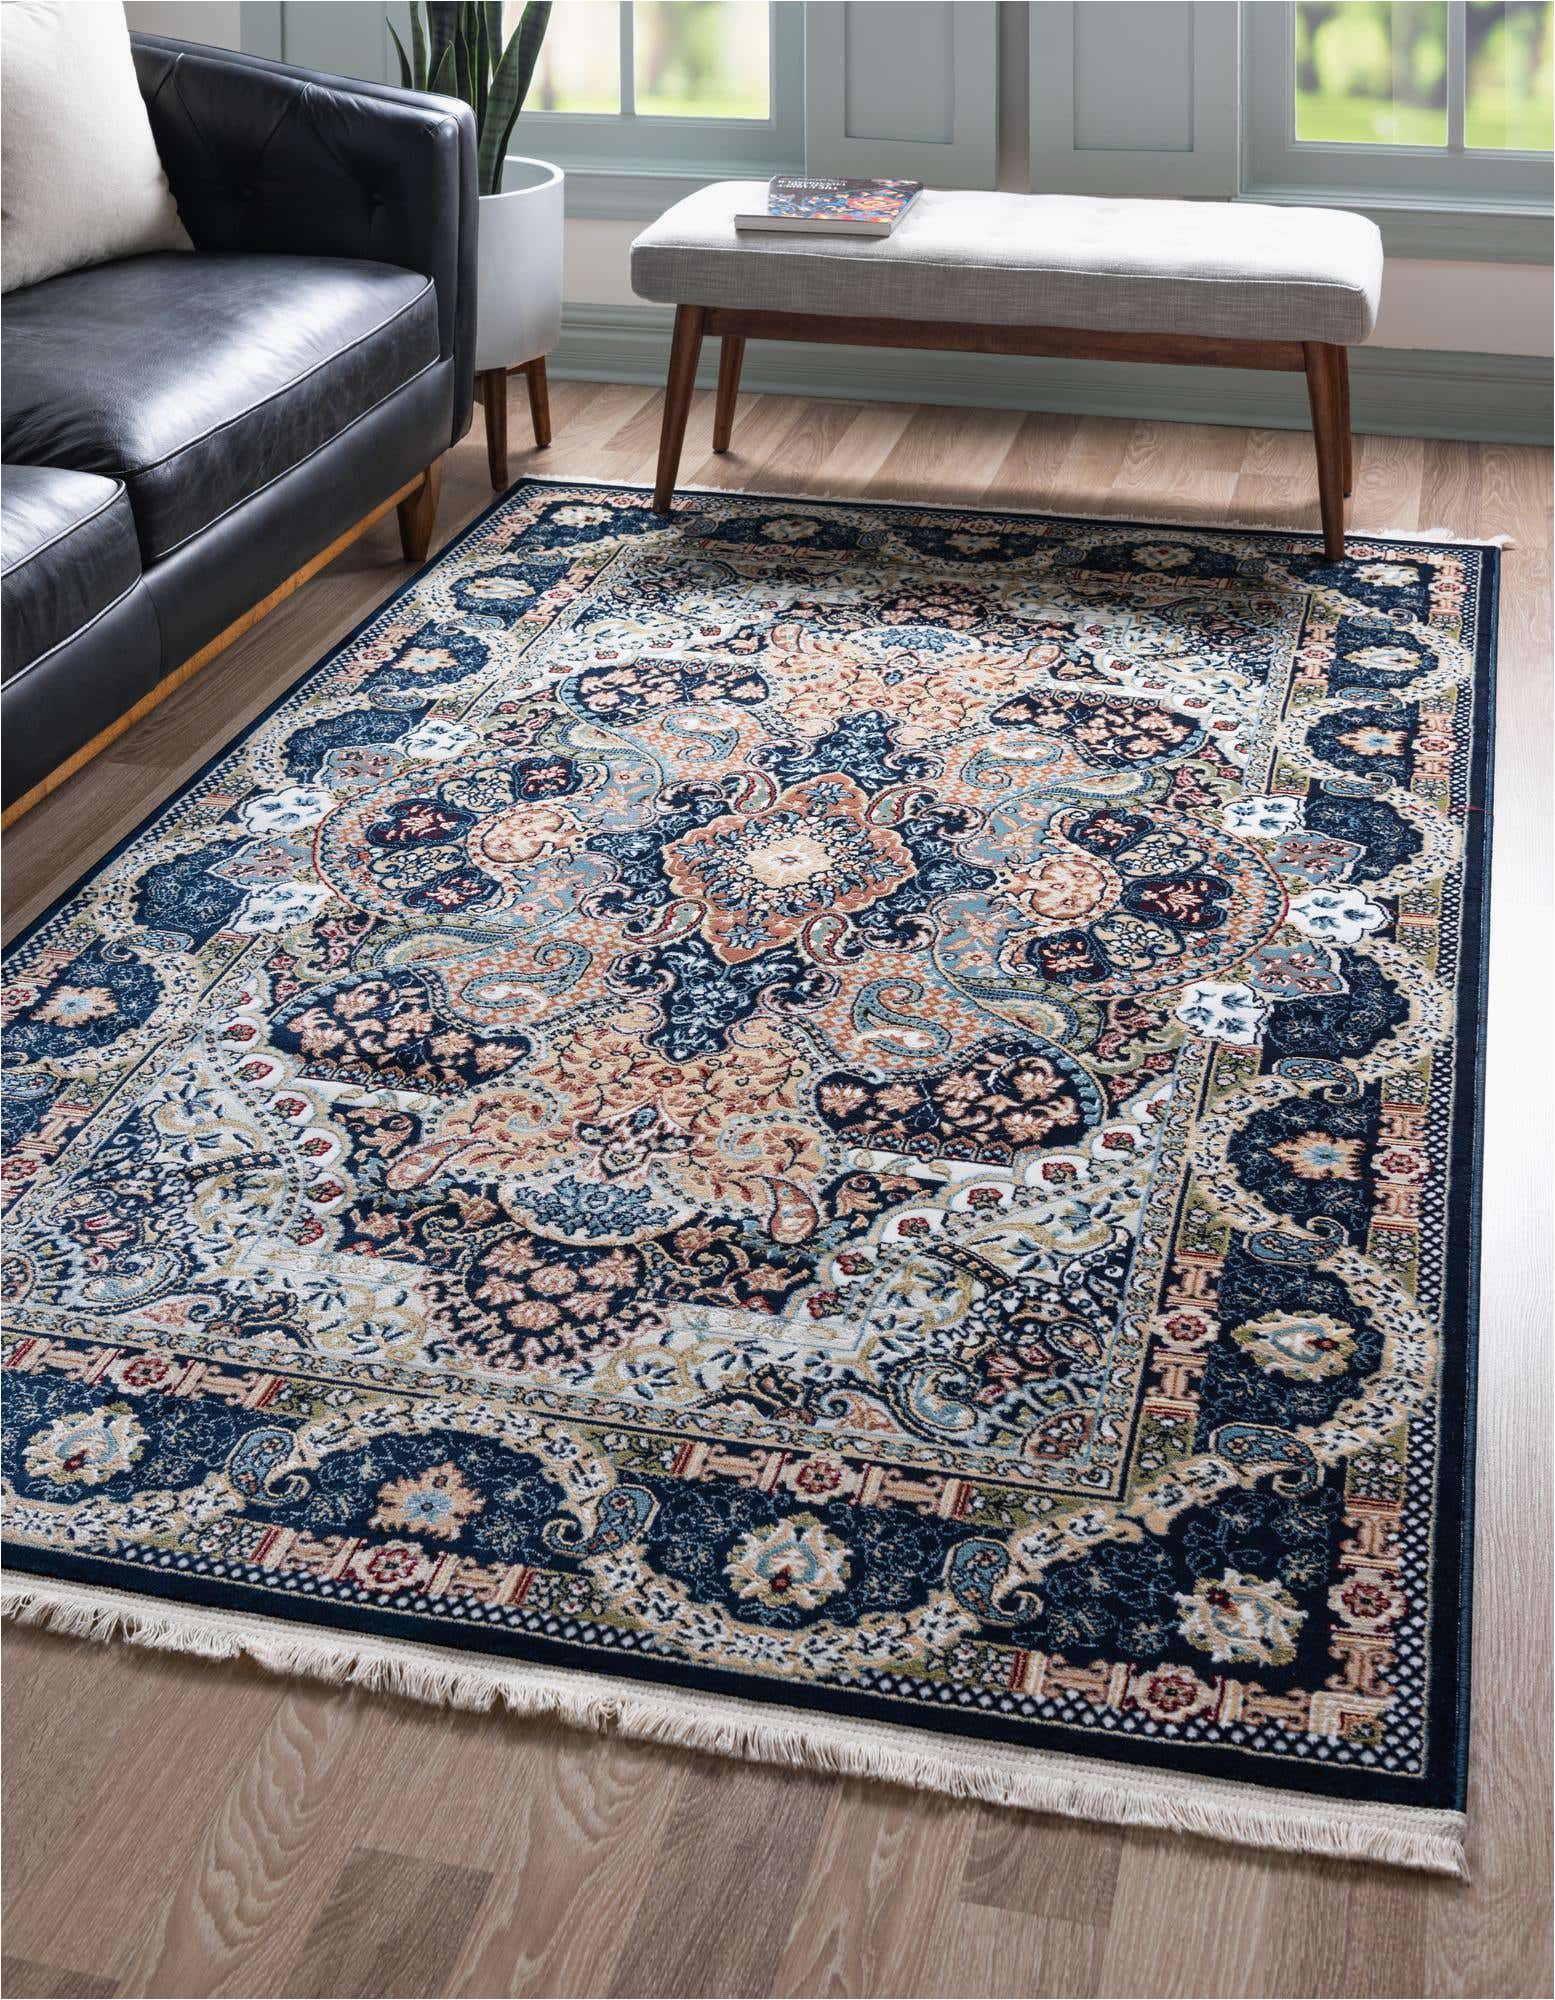 Tan and Blue area Rug 8×10 I Also Loved their Blue 8×10 Rabia area Rug Rt